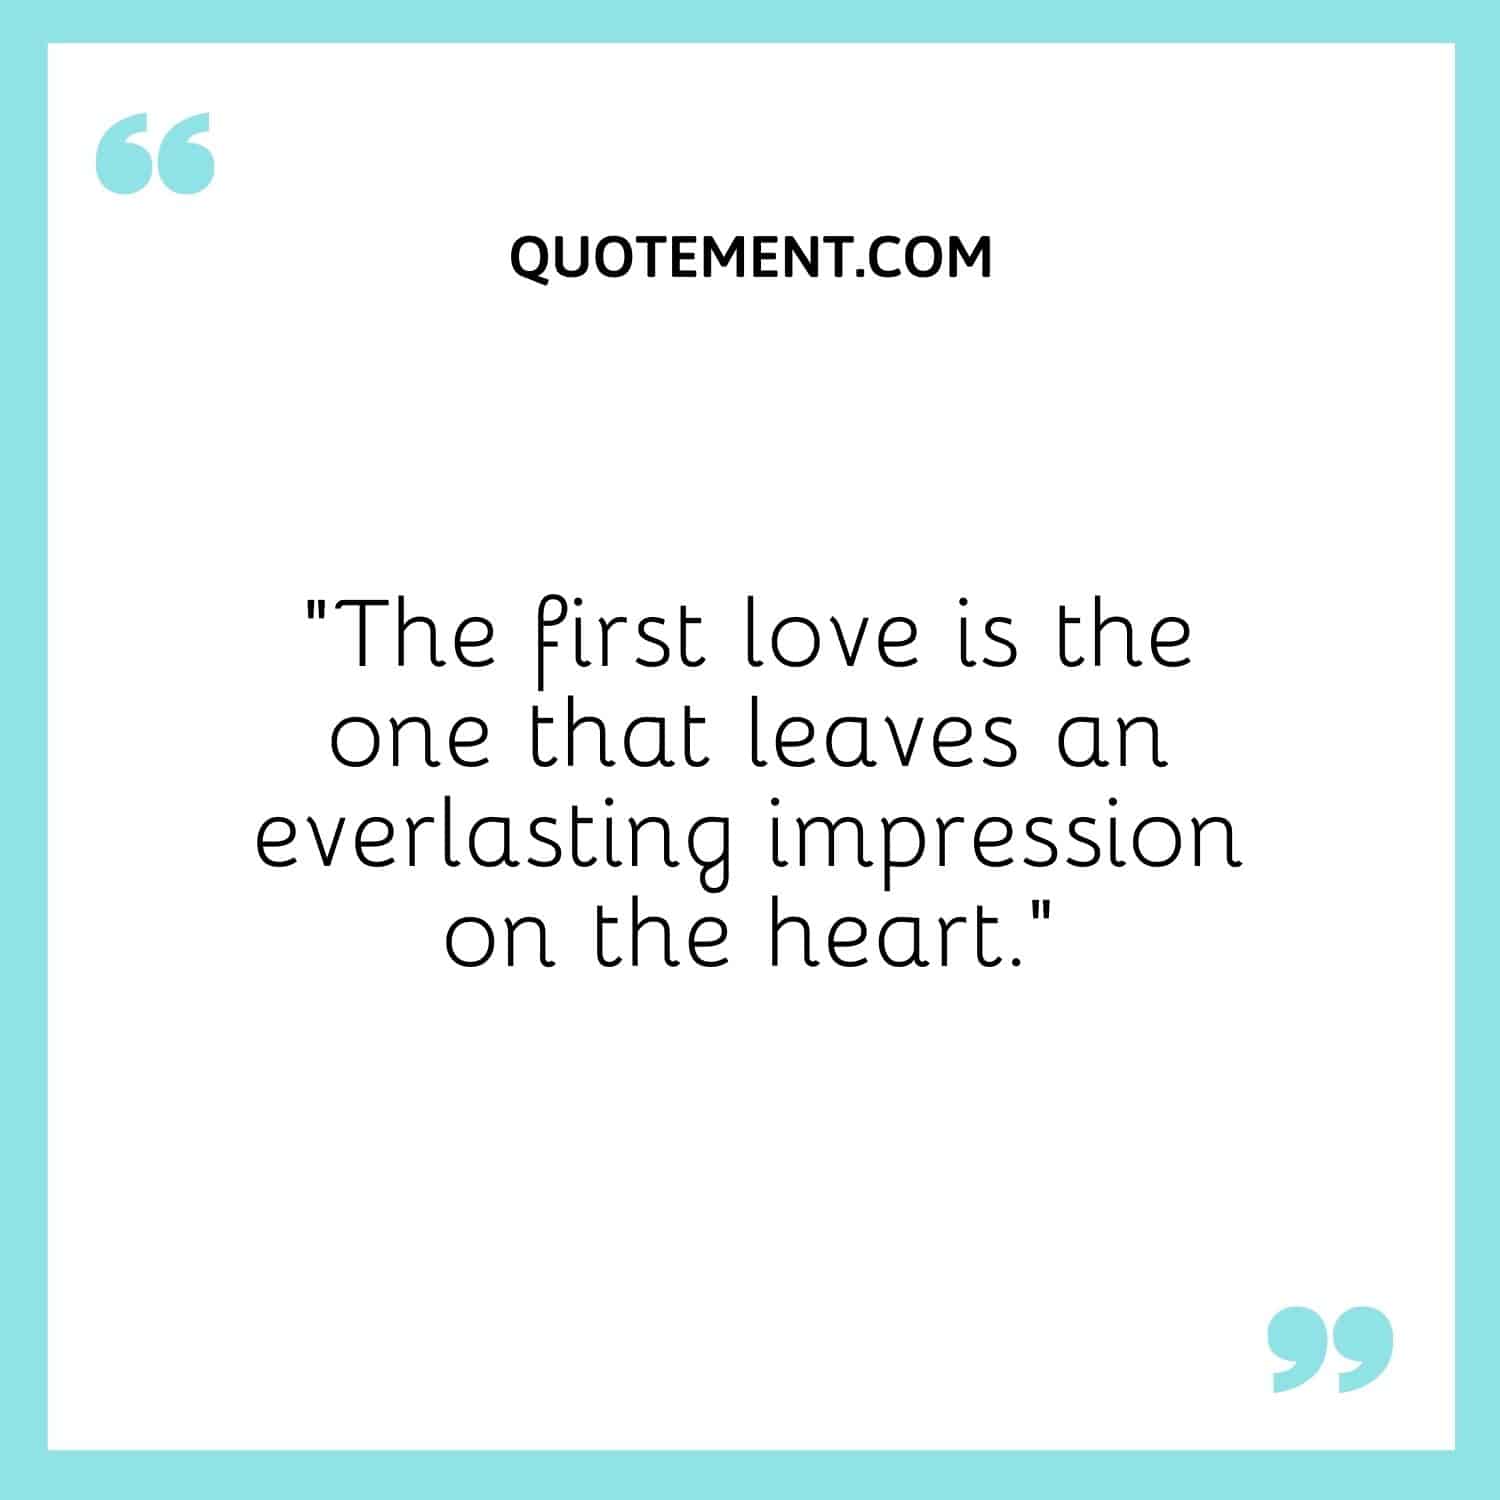 The first love is the one that leaves an everlasting impression on the heart